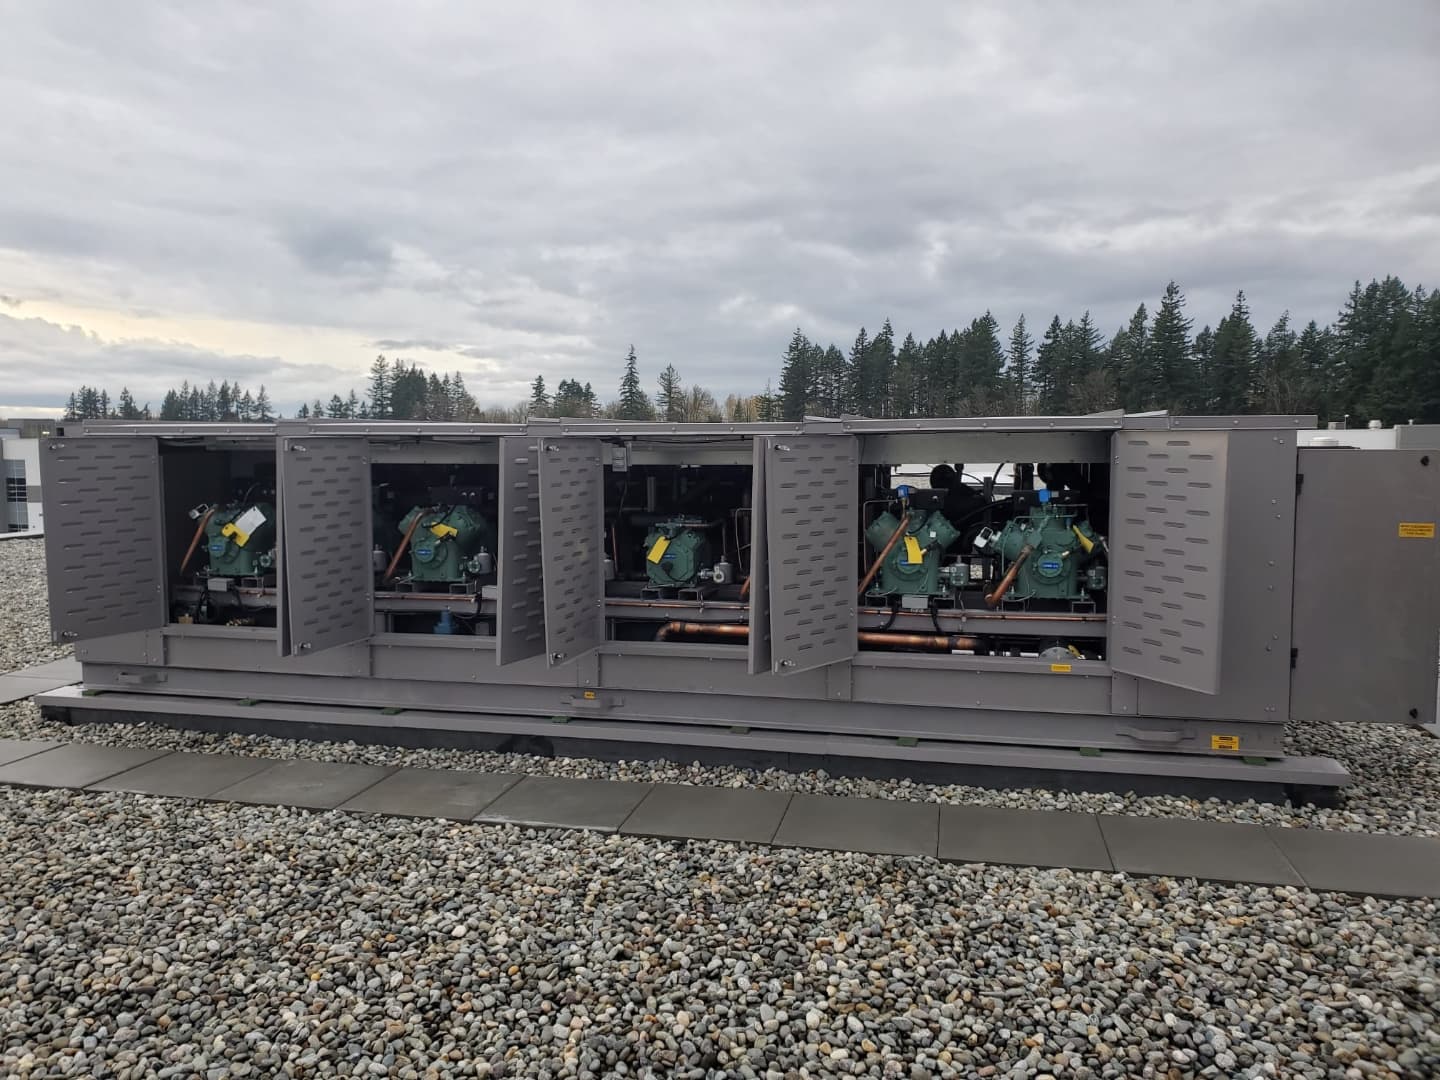 Commercial Refrigeration Systems & HVAC Solution Services in Vancouver | ADN Refrigeration - Commercial Refrigeration & Refrigerated Equipment